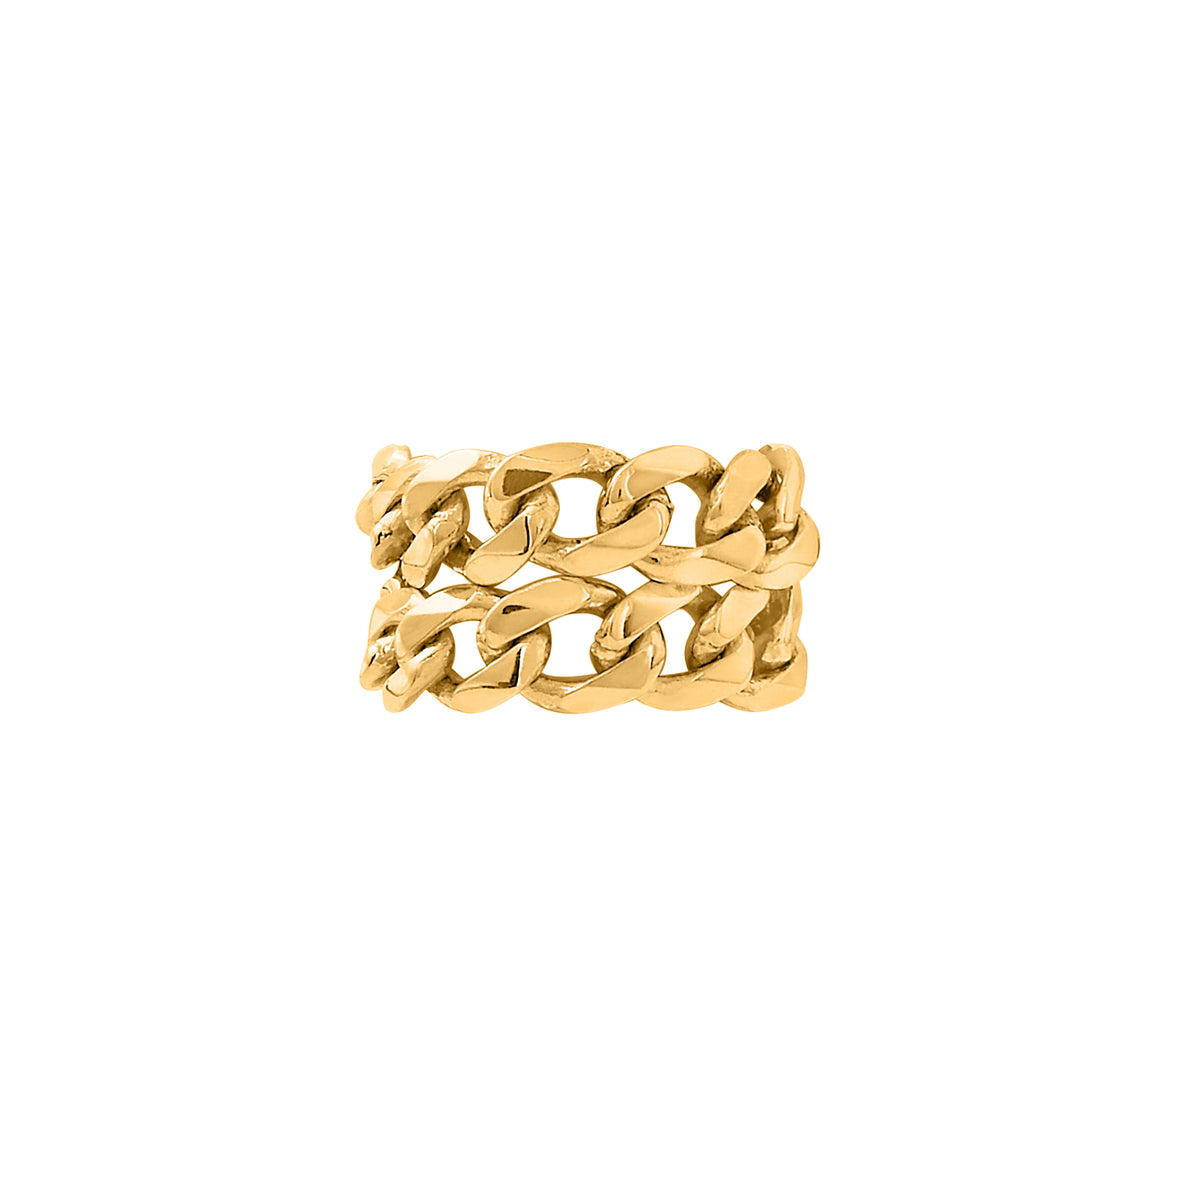 IDE CHAIN DOUBLE RING gold plated this ring consists of 2 link chains of 0.7CM Width 1.4CM Connection plate 1CM x 1.4CM UNISEX 925 recycled sterling silver handmade in Bali 18 carat gold plated